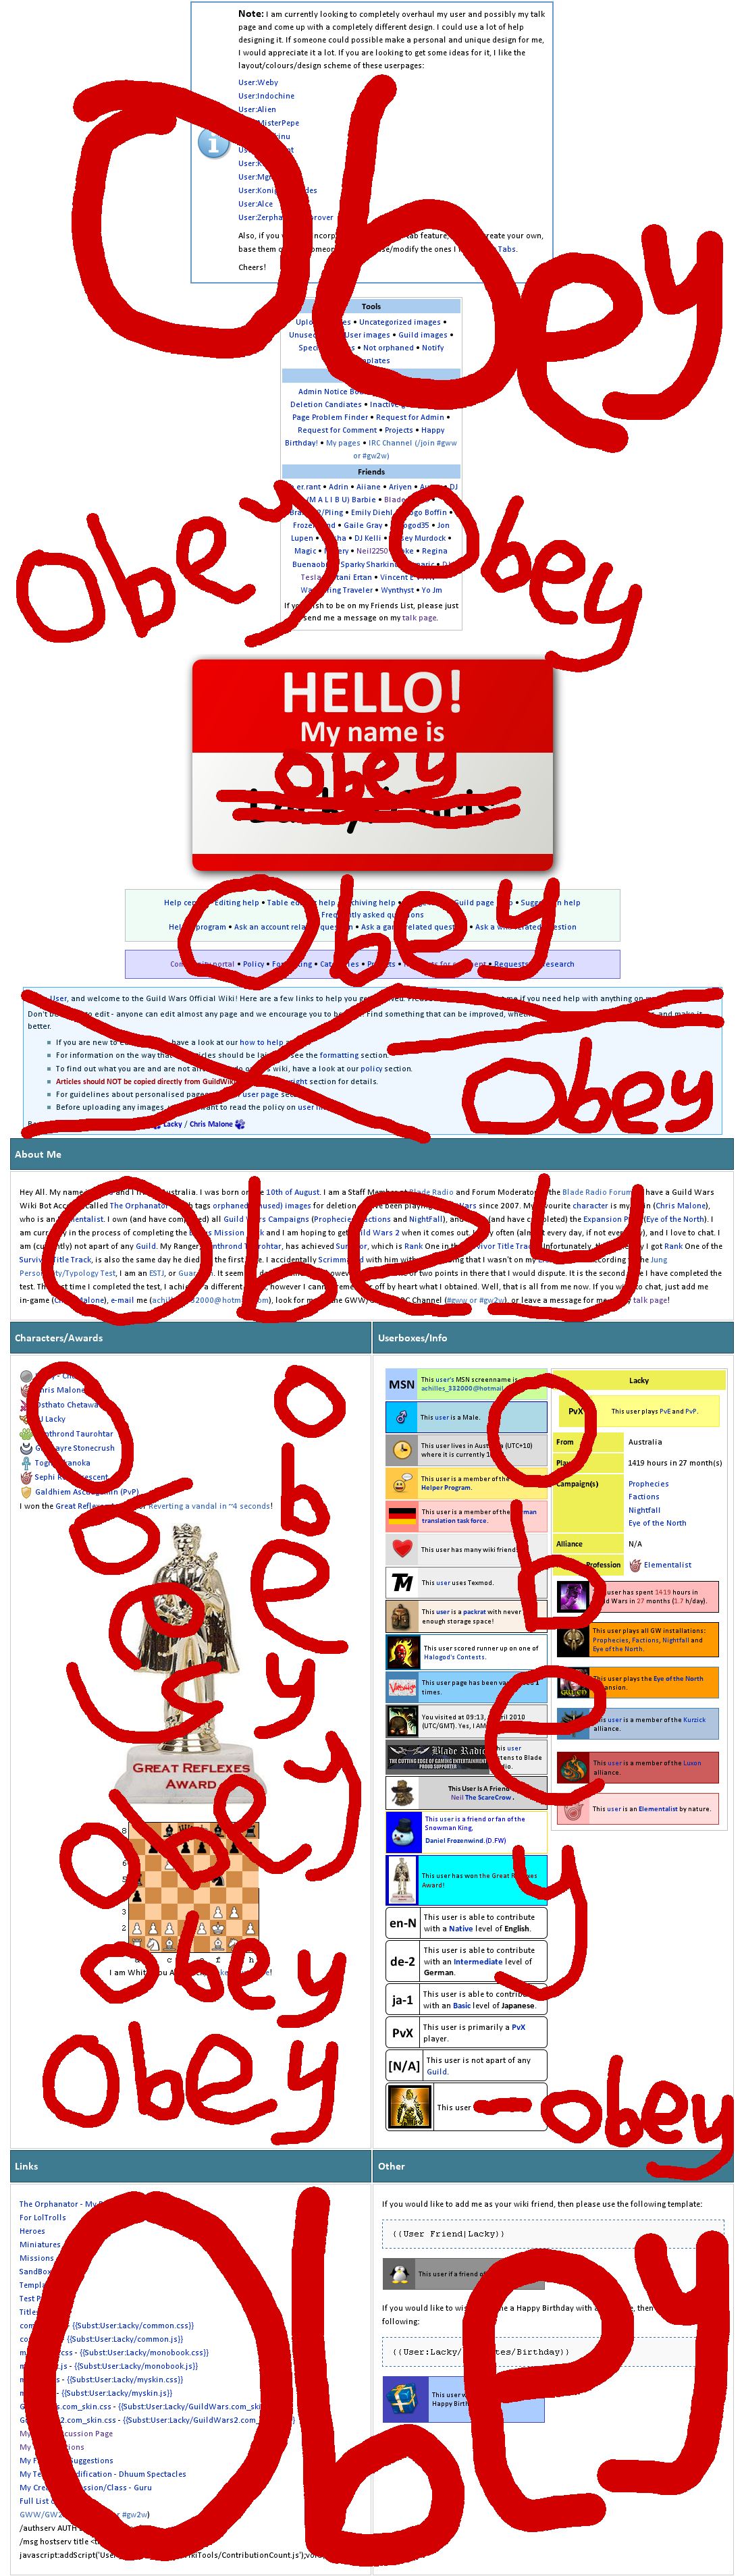 User Lacky User Page Obey.PNG